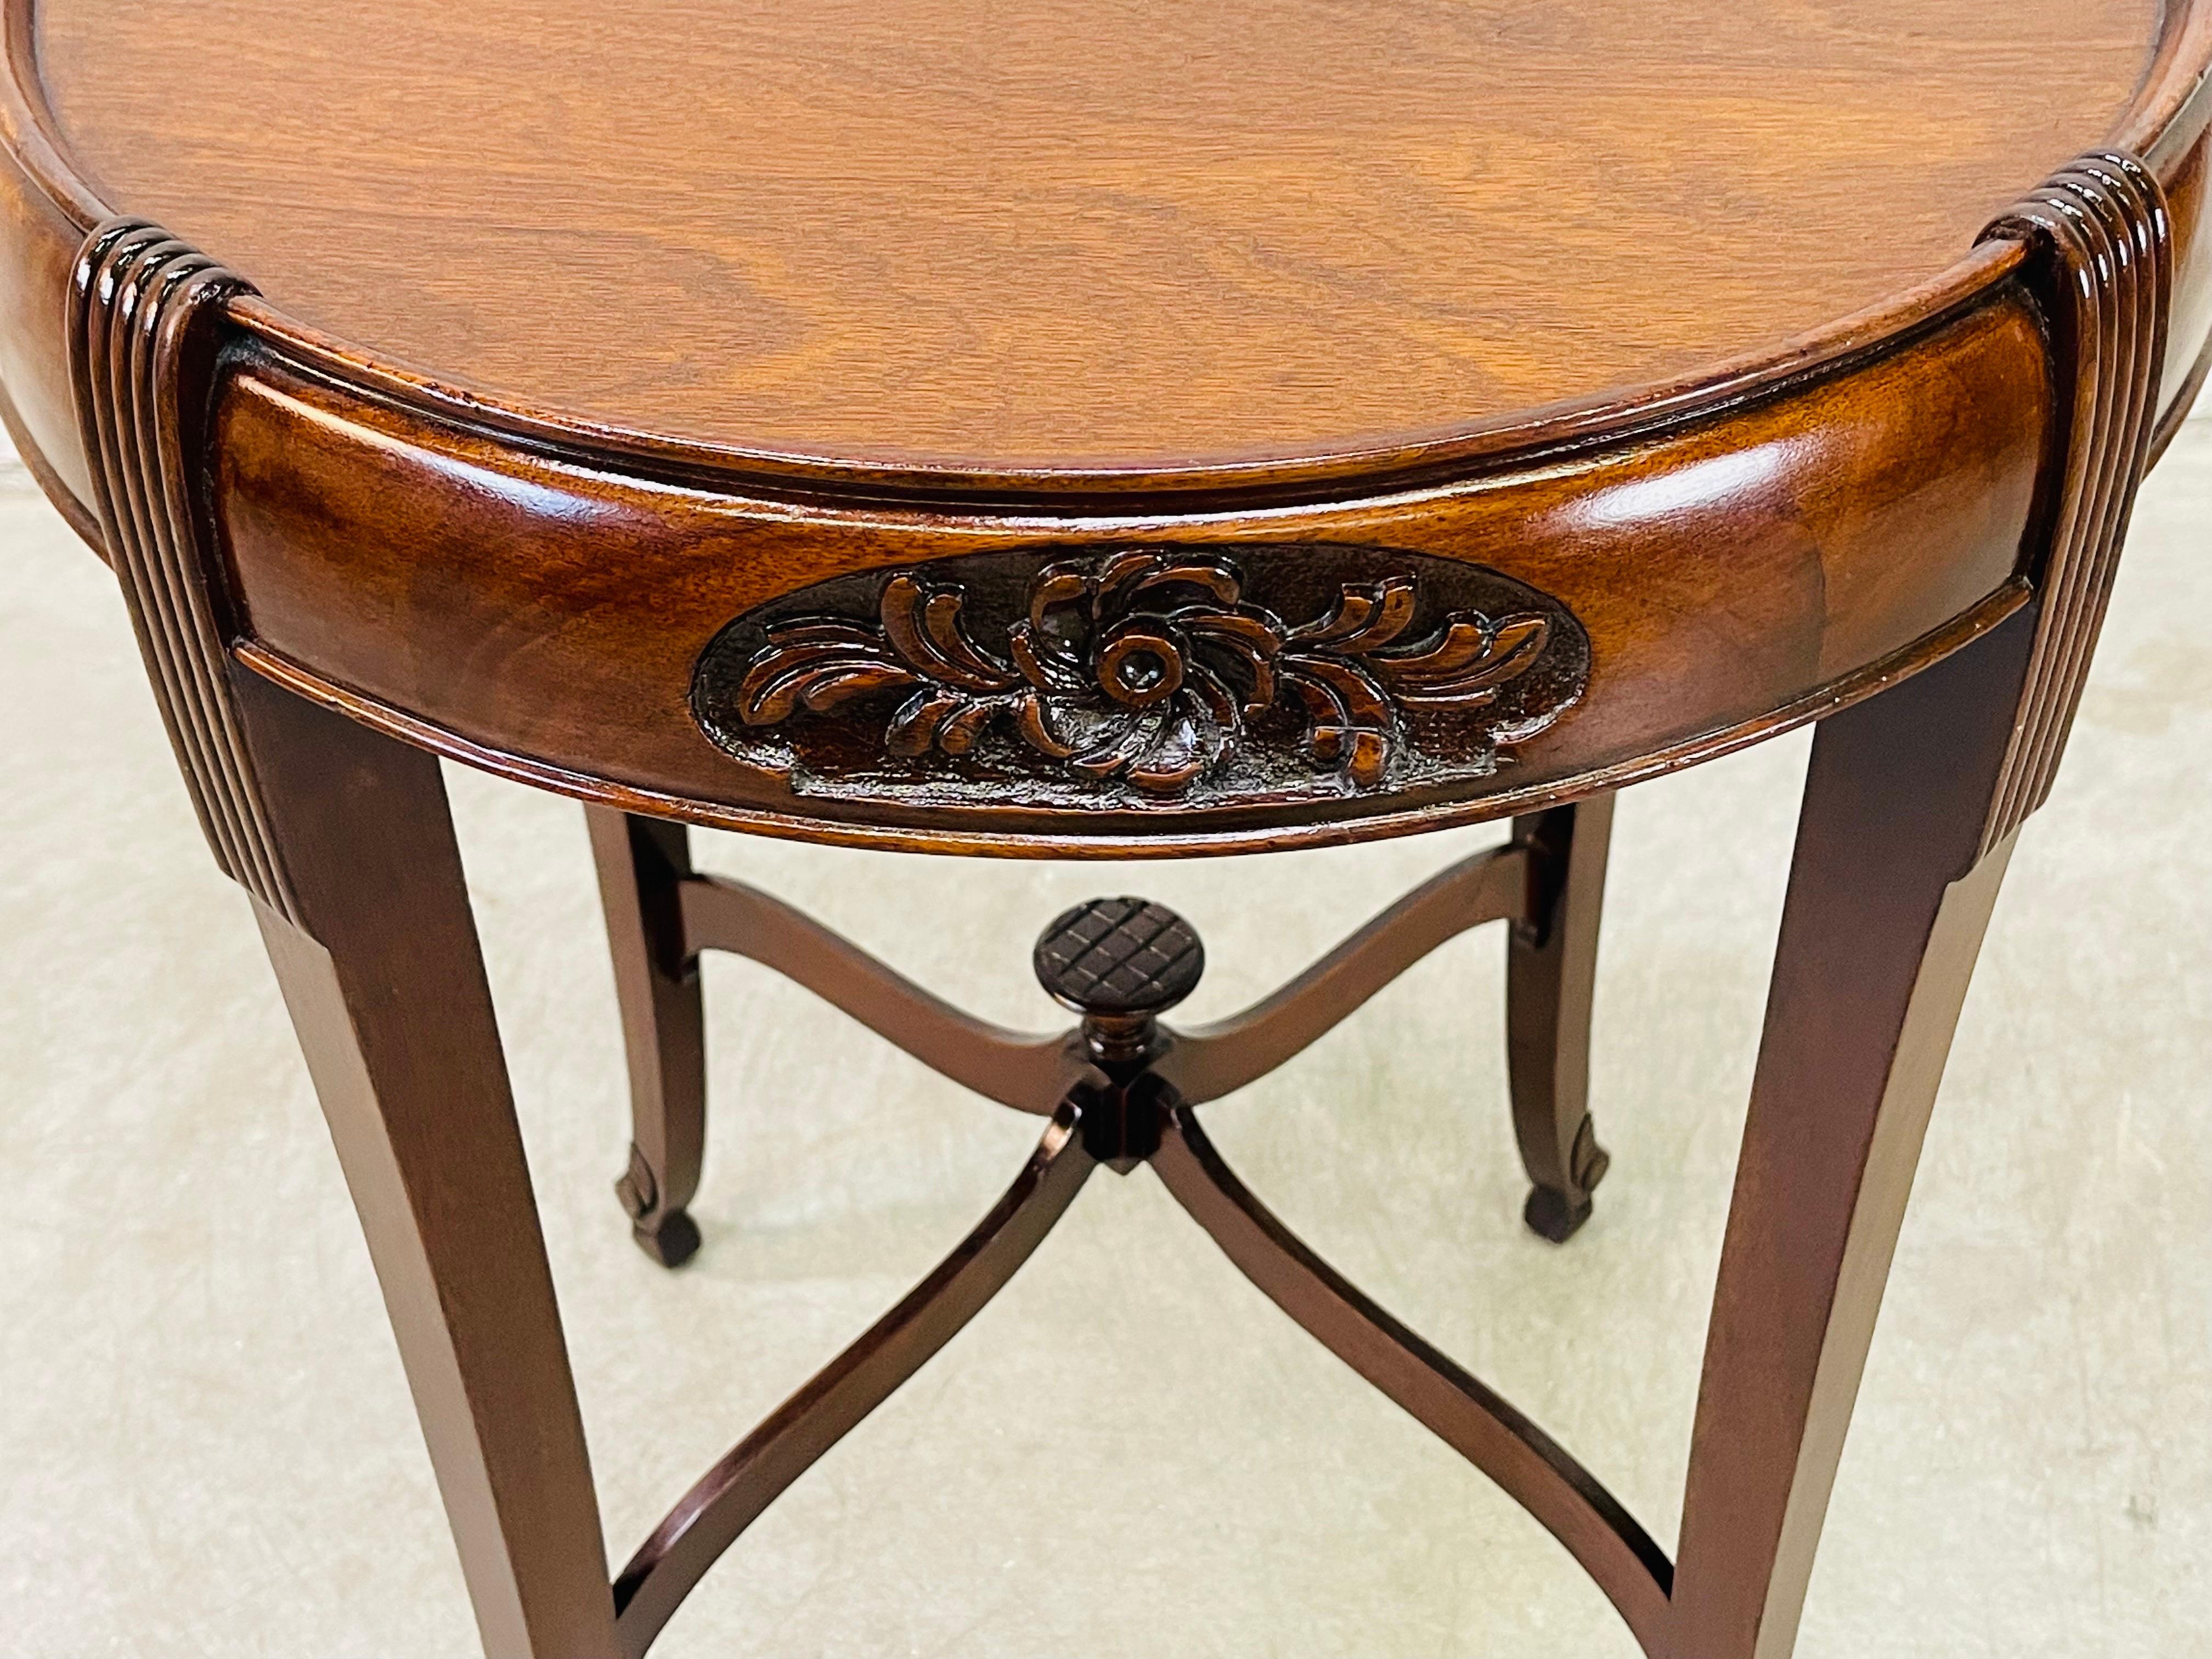 Vintage 1950s round mahogany floral carved side table. The table has carved accents on top and on the feet. There is ornate carved supports in the middle. Newly refinished condition. No marks.